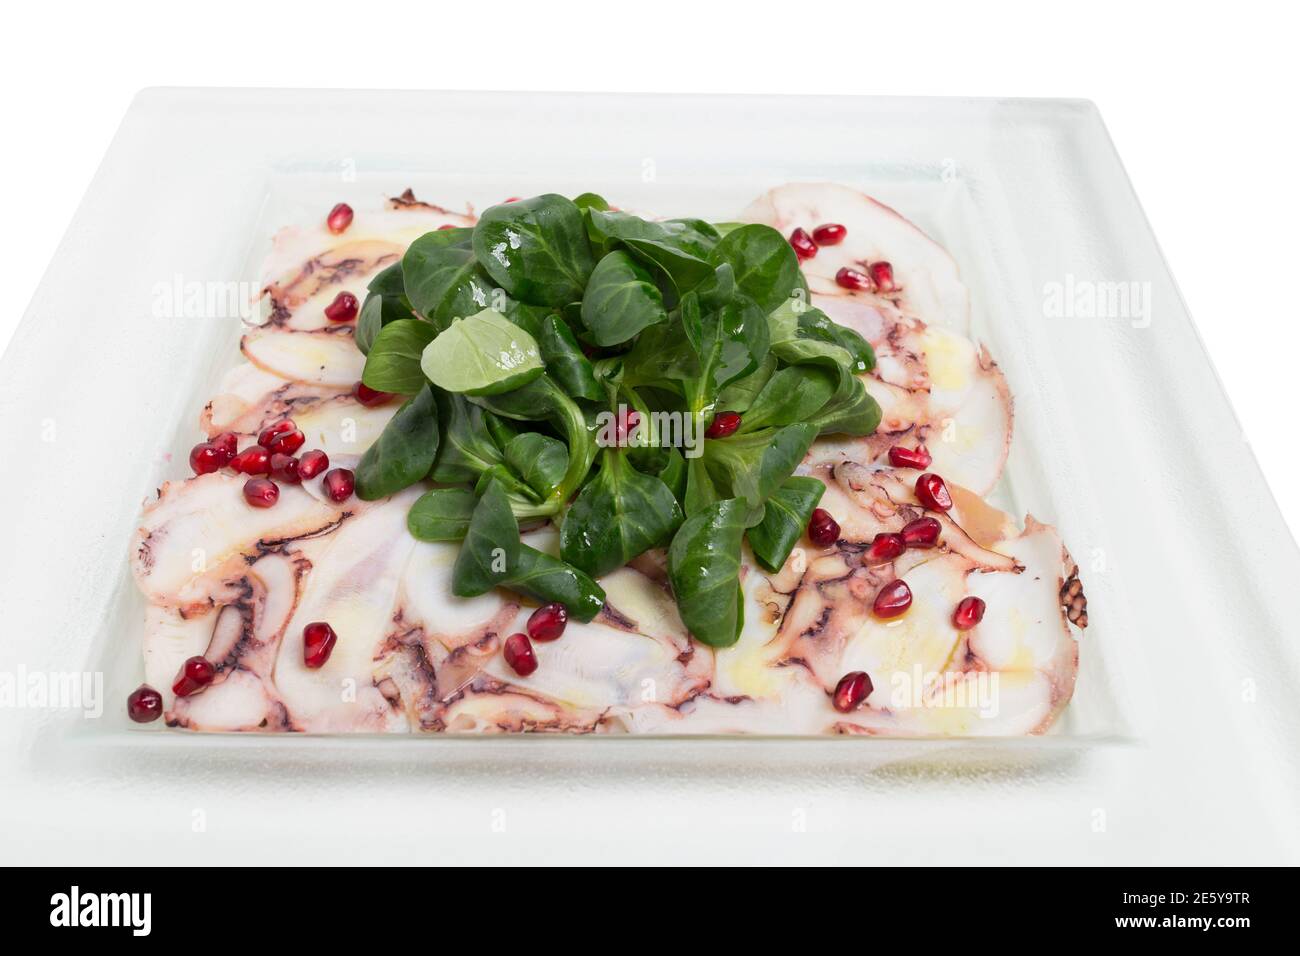 Carpaccio octopus with shpinach in a white plate. It is located in a white background. Close-up. Stock Photo